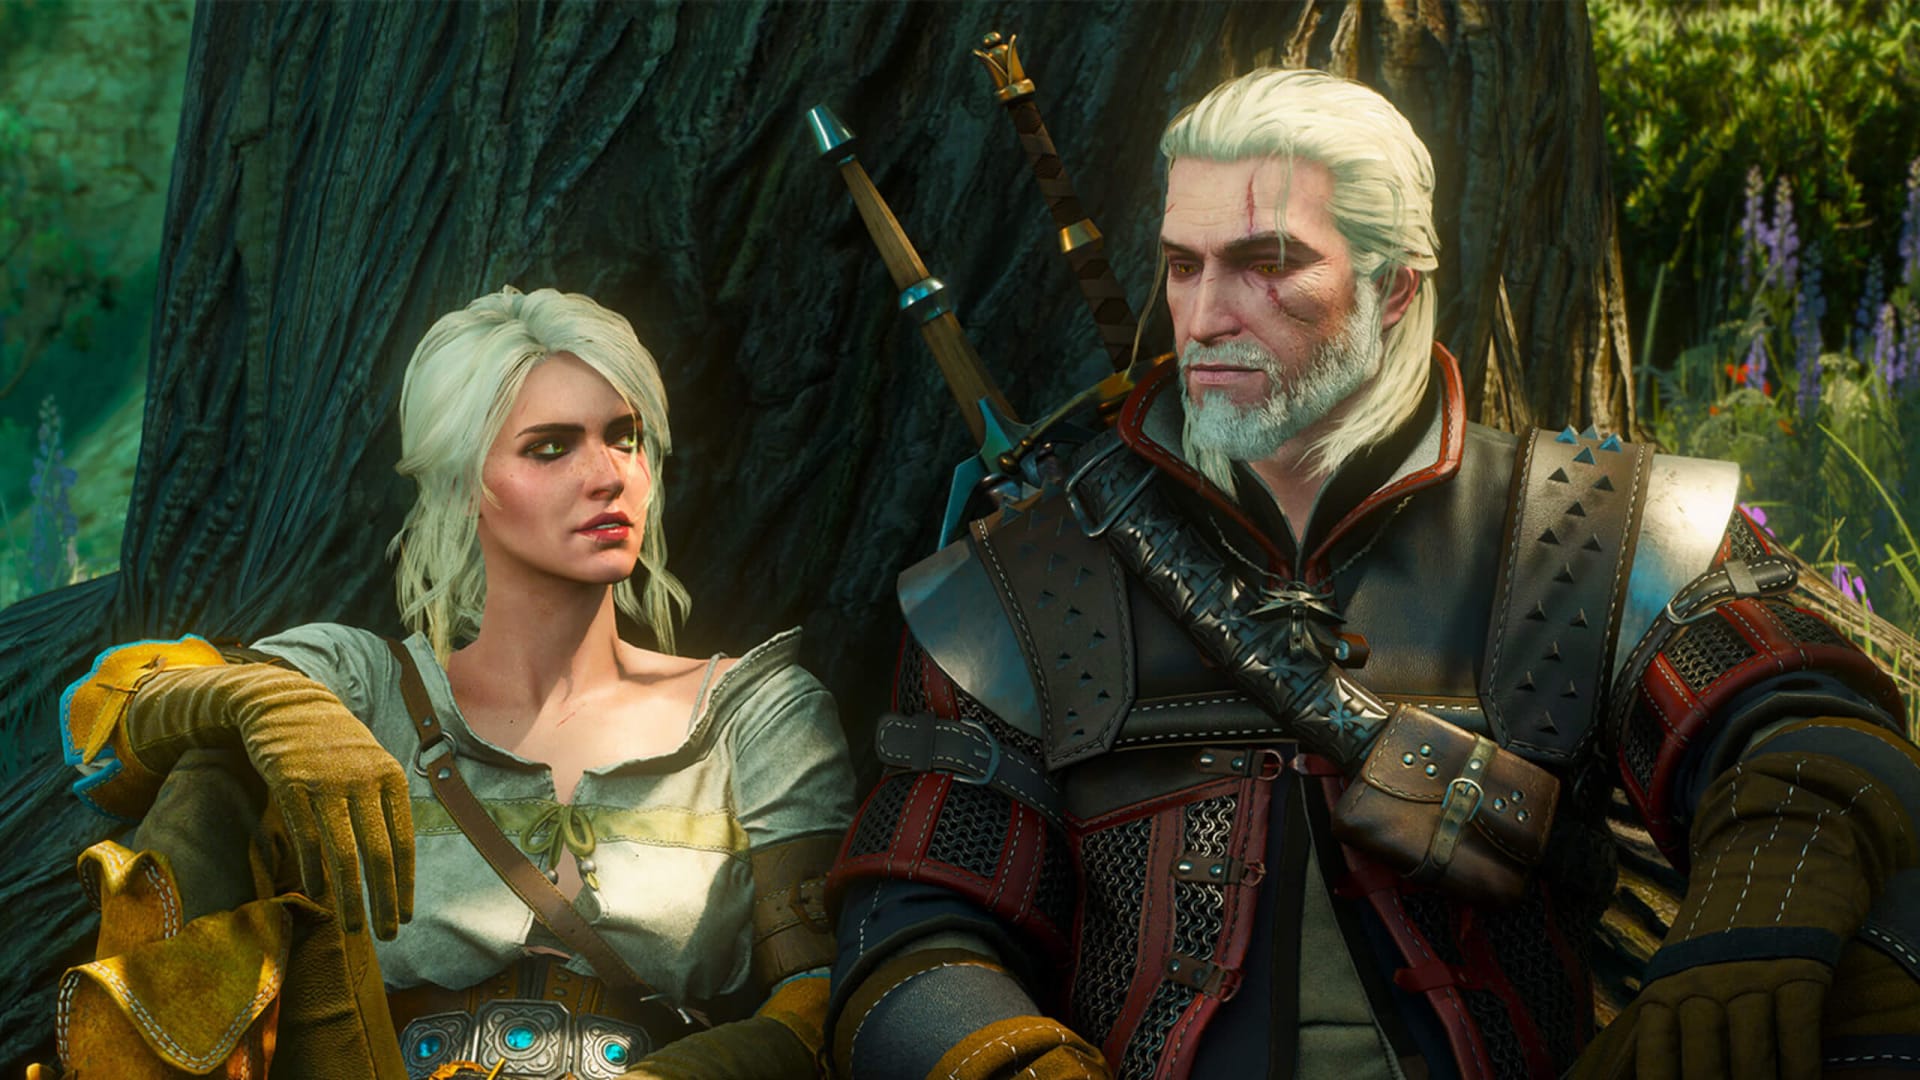 First-person Mod released for The Witcher 3 Next-Gen Update